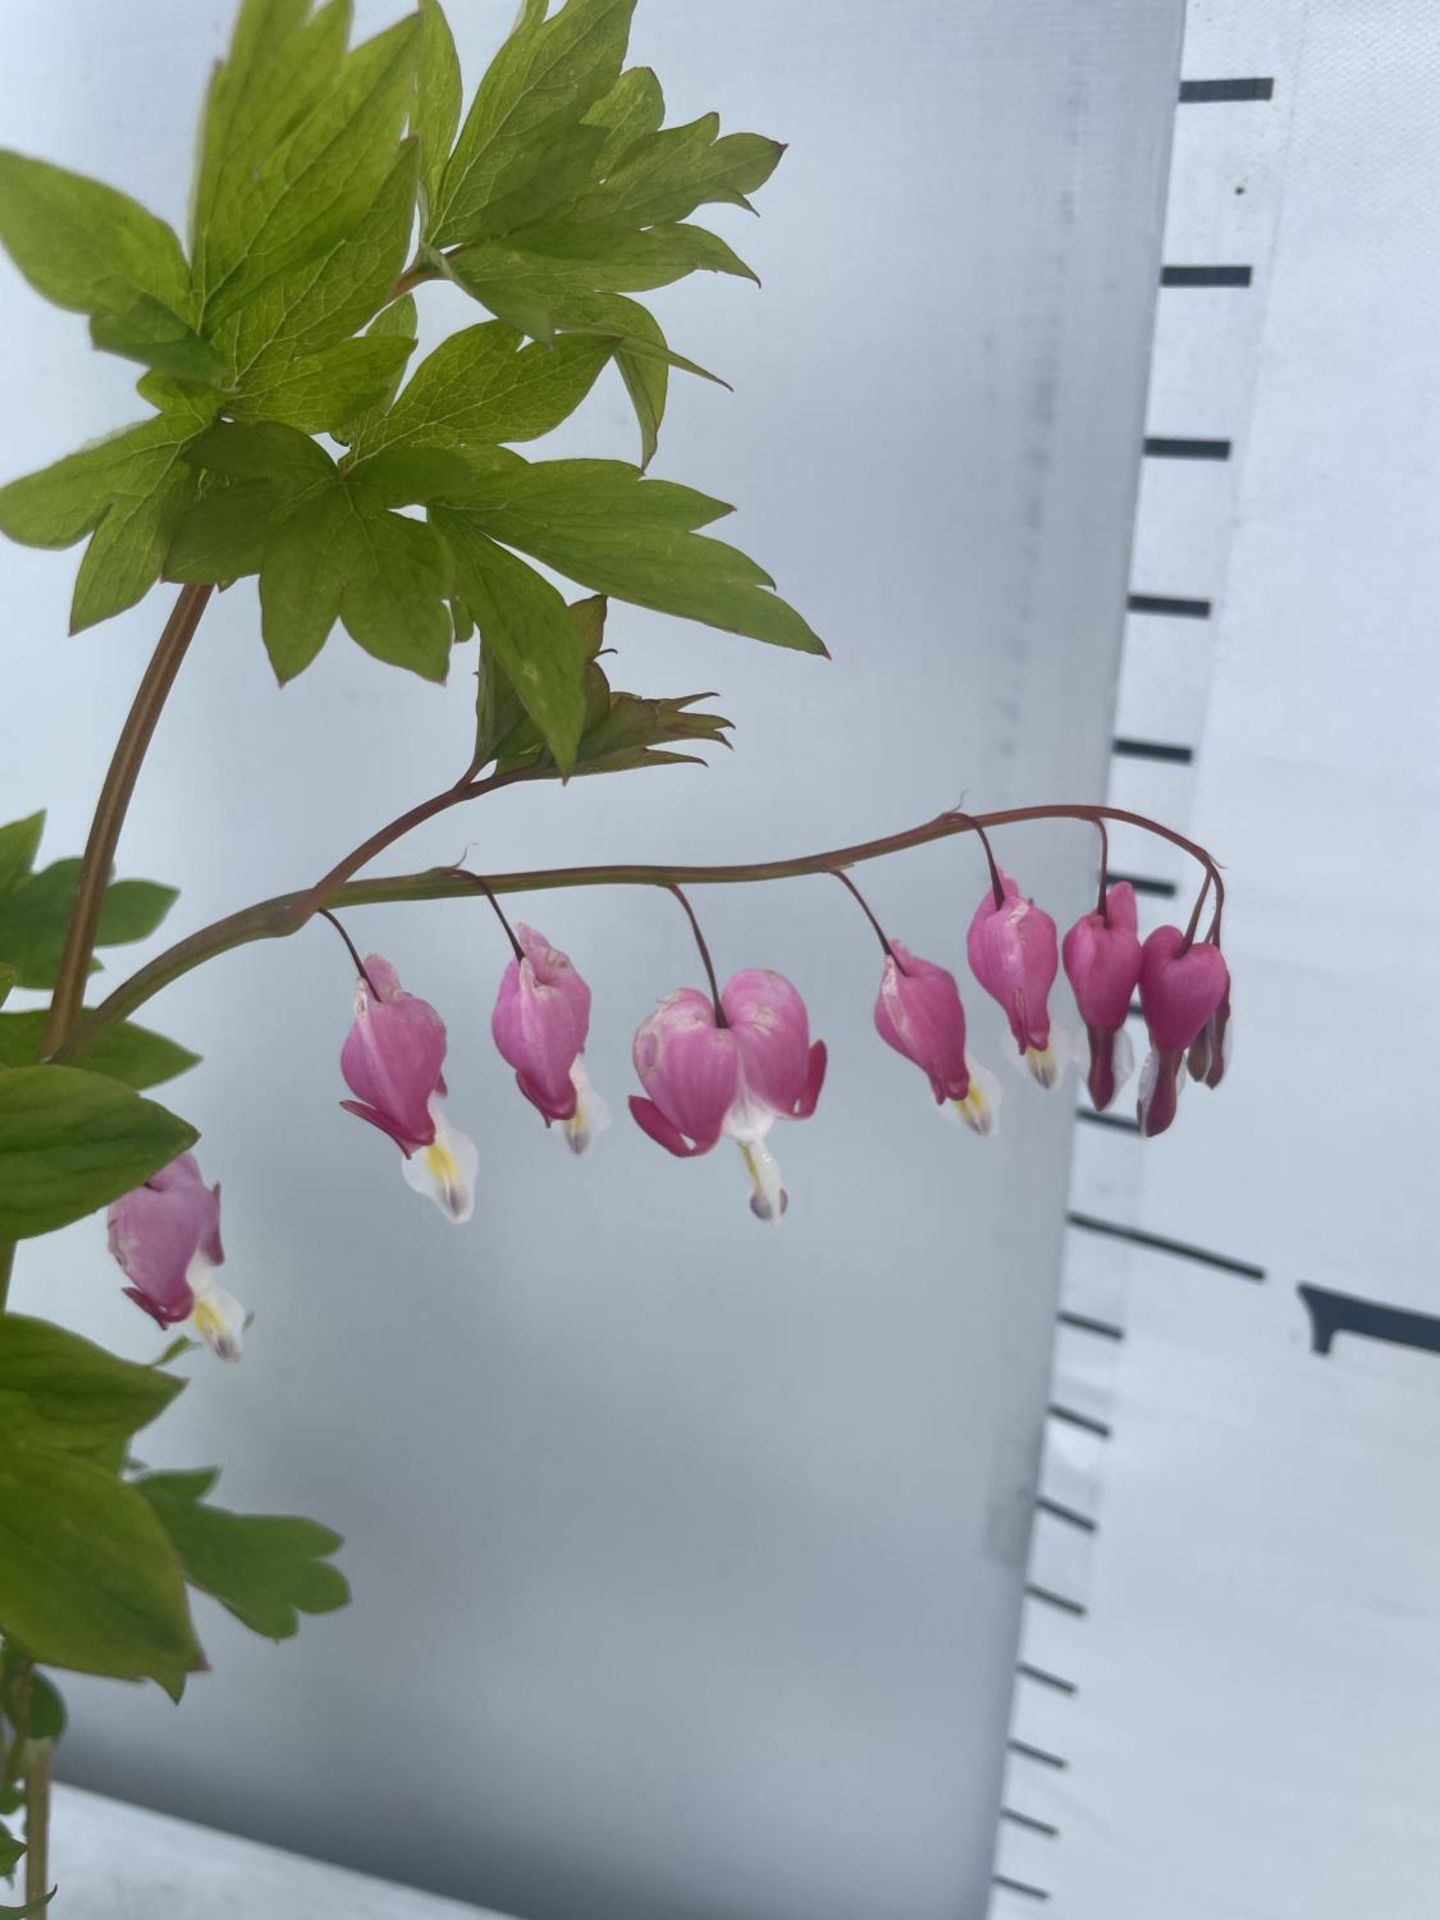 SIX DICENTRA SPECTABILIS BLEEDING HEART 50CM TALL TO BE SOLD FOR THE SIX PLUS VAT - Image 3 of 4